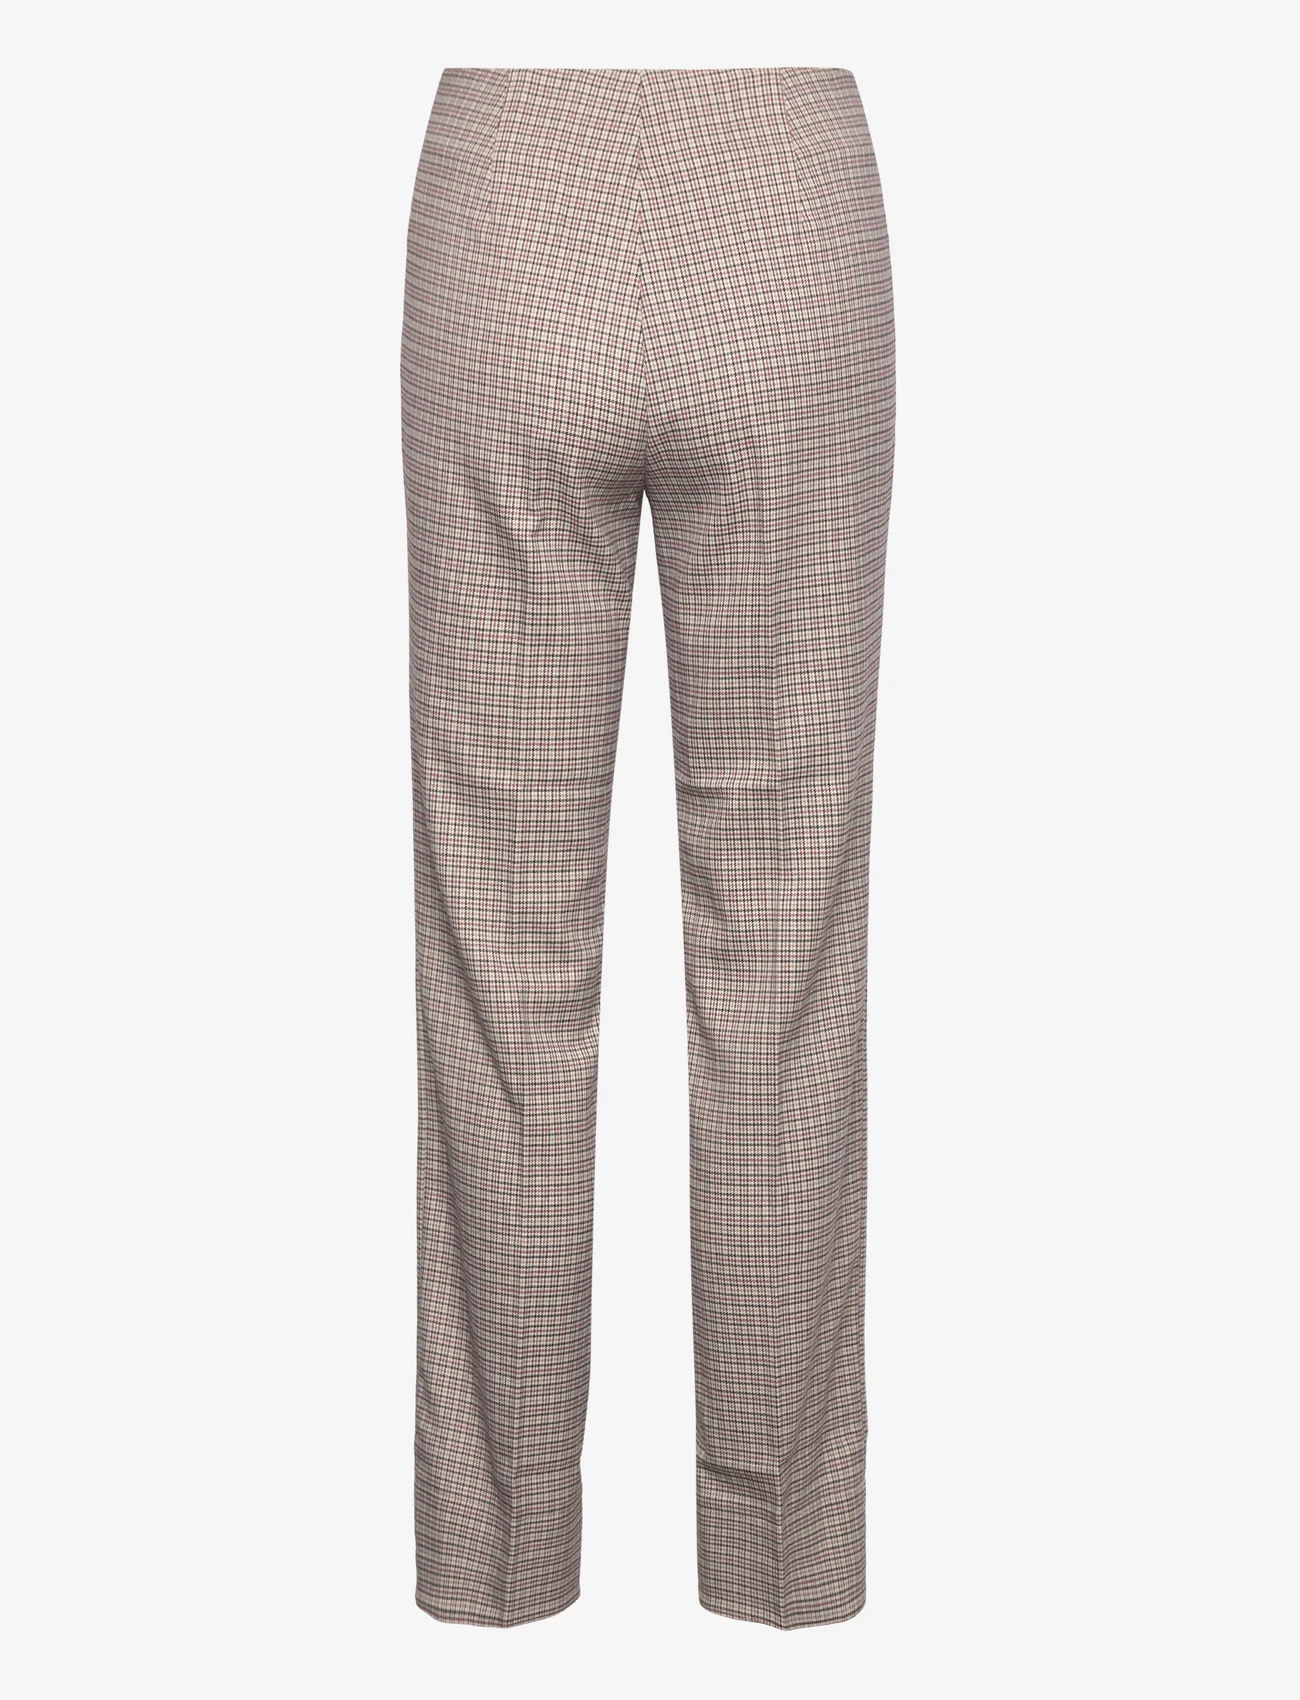 Notes du Nord - Emia Pants - slim fit bukser - checked - 1